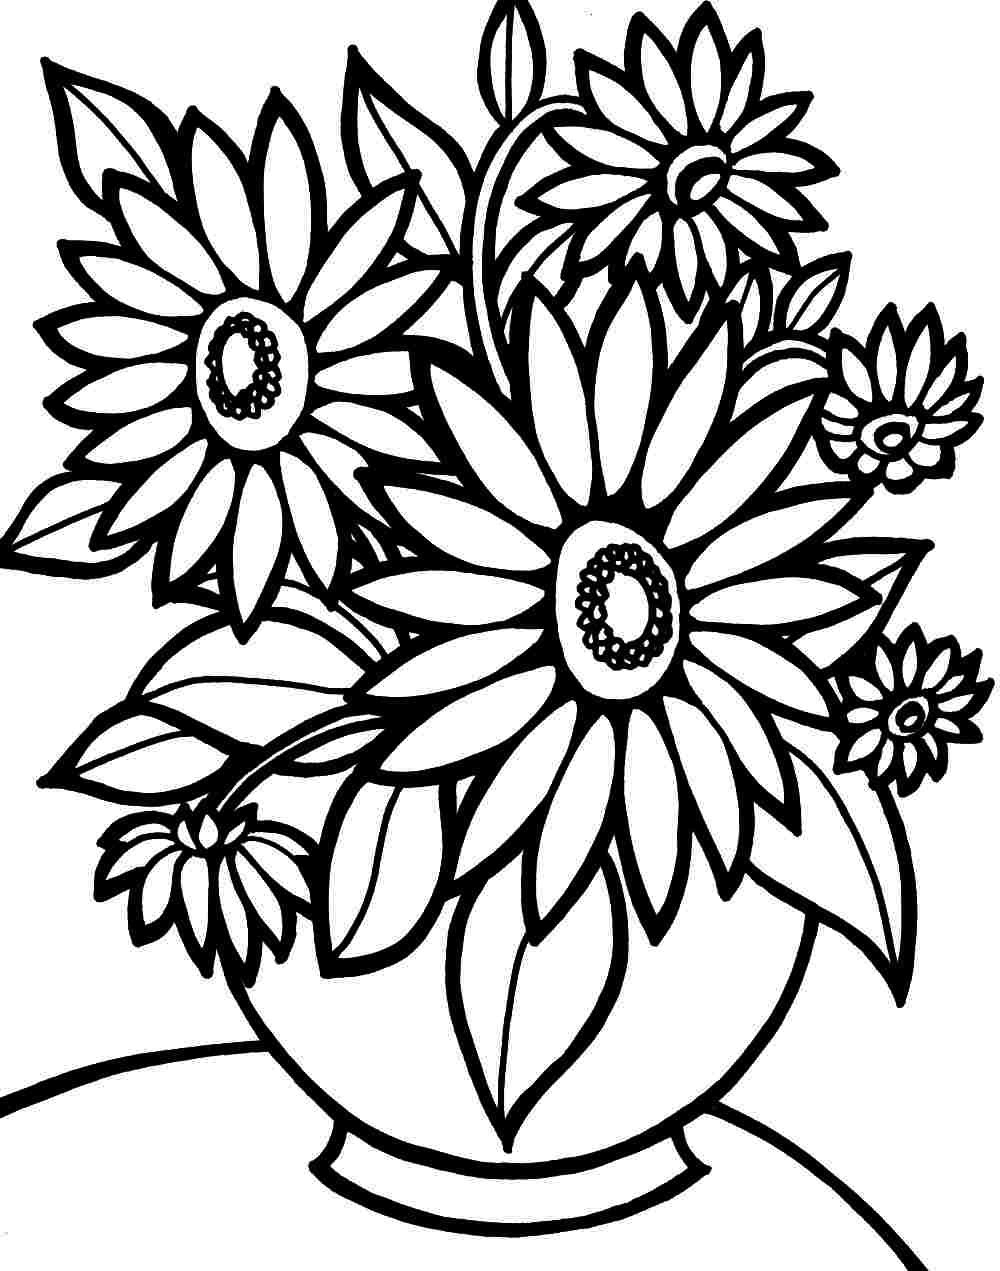 Vase Of Sunflowers Coloring Page